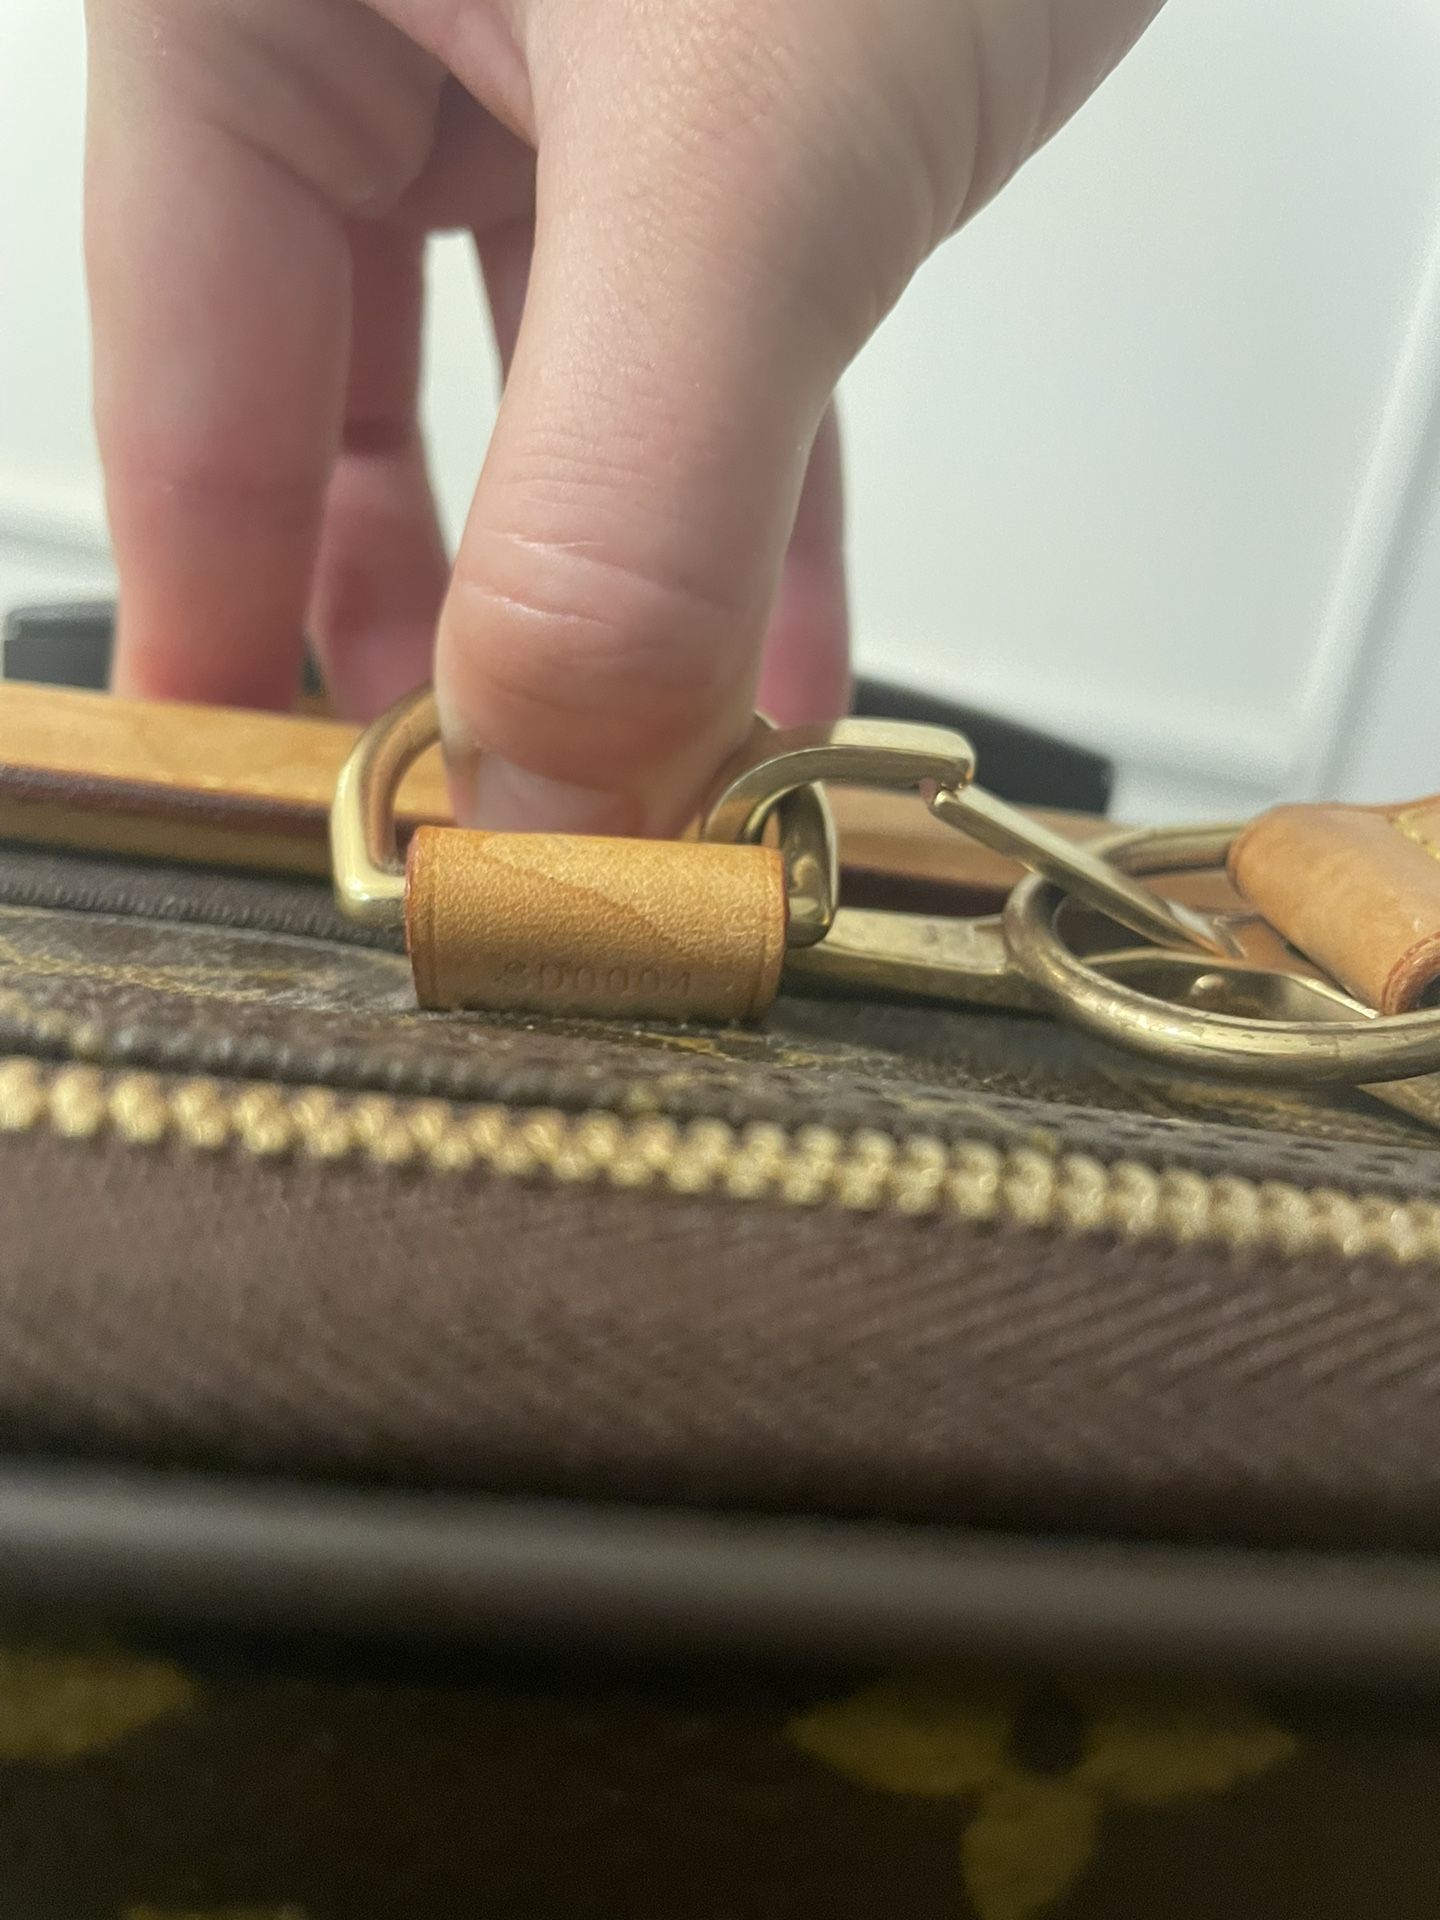 Louis Vuitton Pegase 70 Suitcase for Sale in West Hollywood, CA - OfferUp